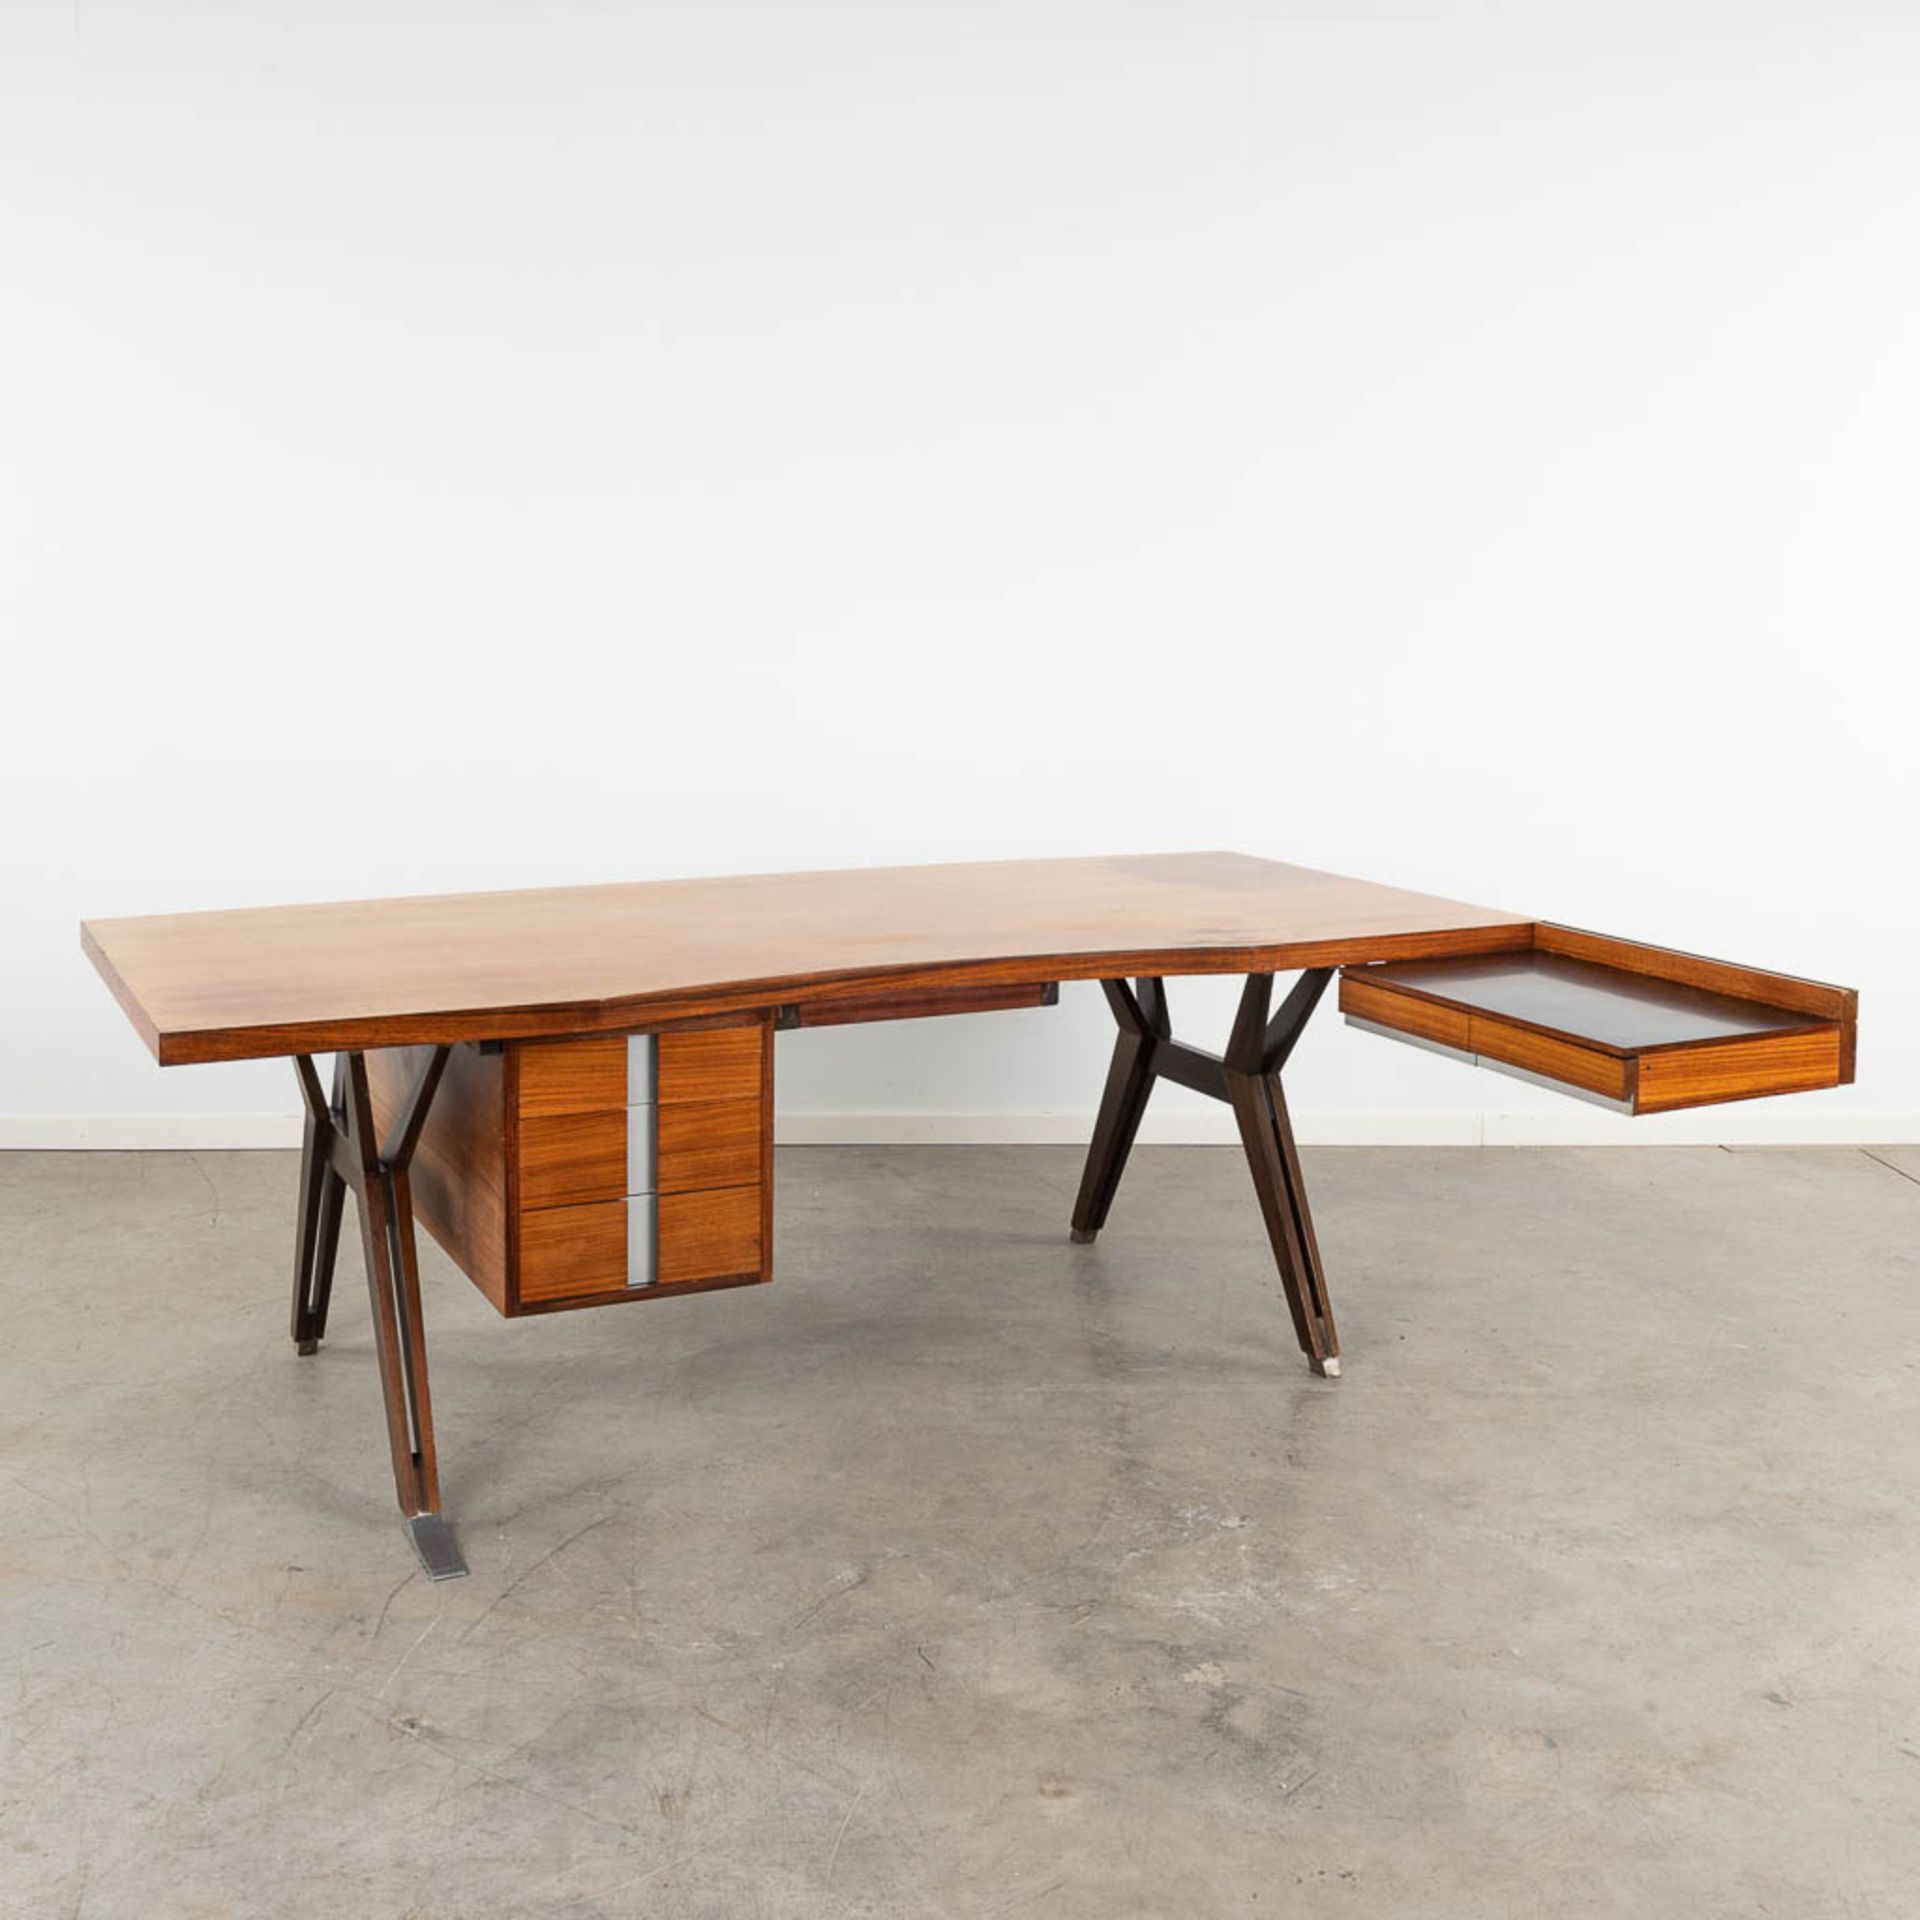 Ico PARISI (1916-1996) 'Terni Desk' by MIM Roma (D:98 x W:210 x H:73 cm) - Image 3 of 13